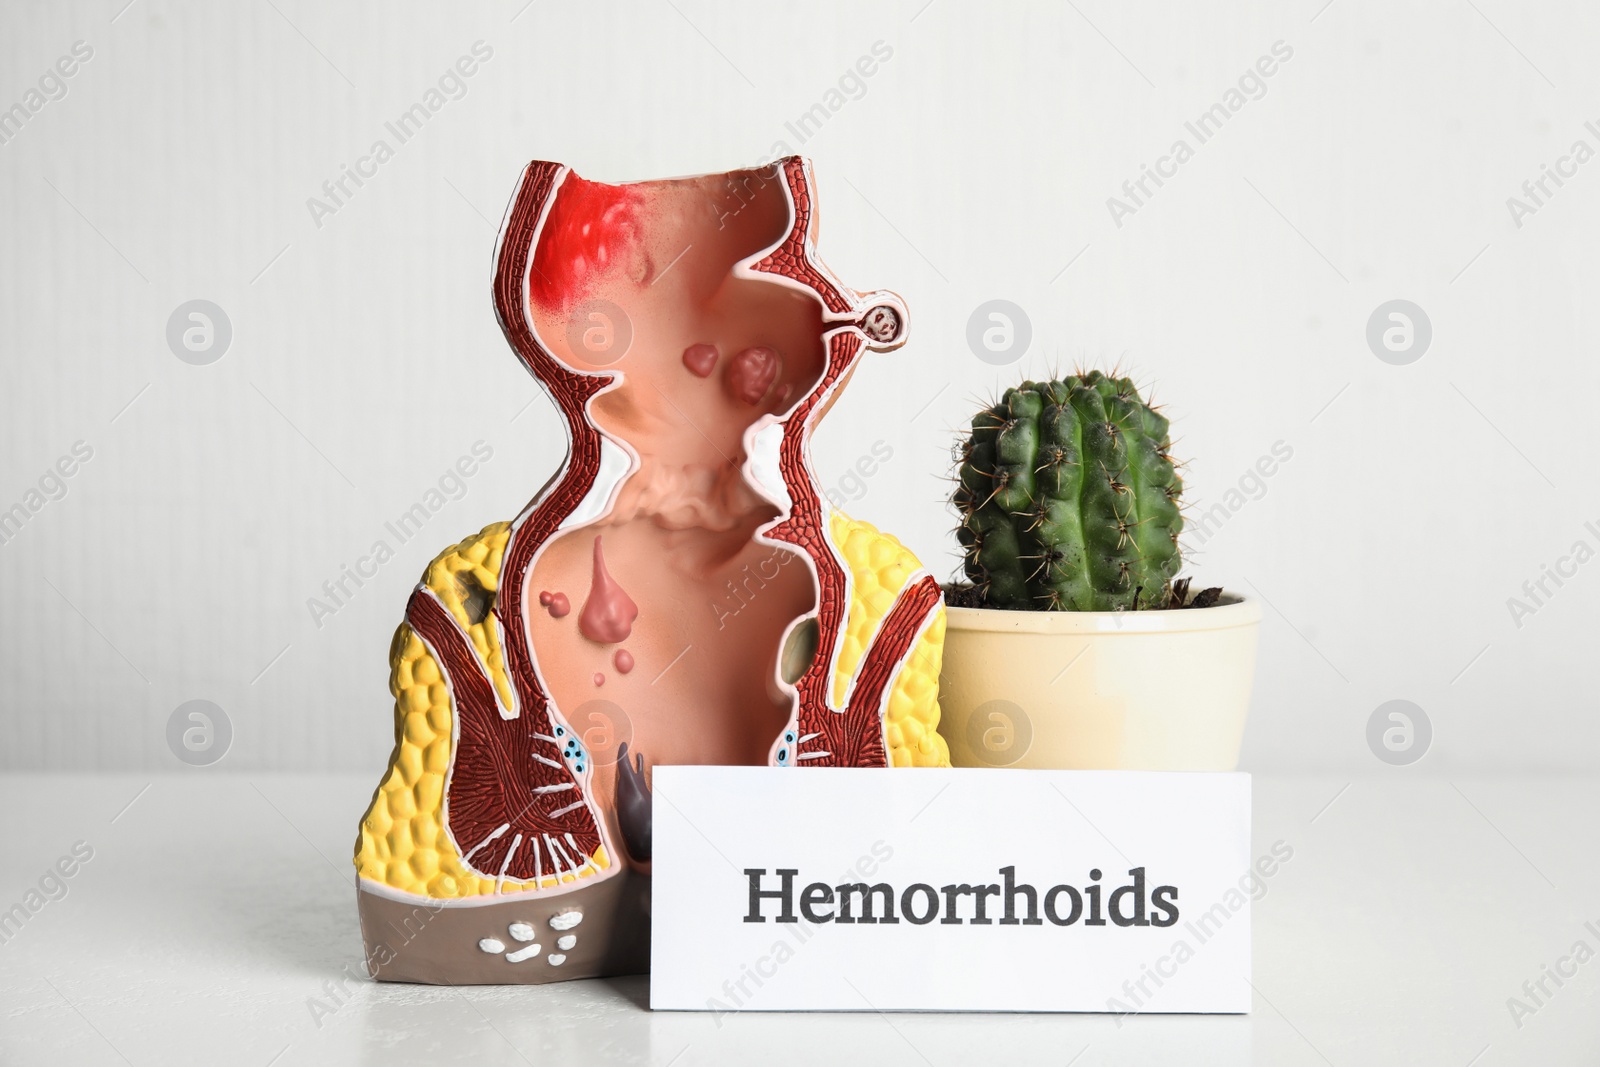 Photo of Model of unhealthy lower rectum, cactus and card with word Hemorrhoids on light background